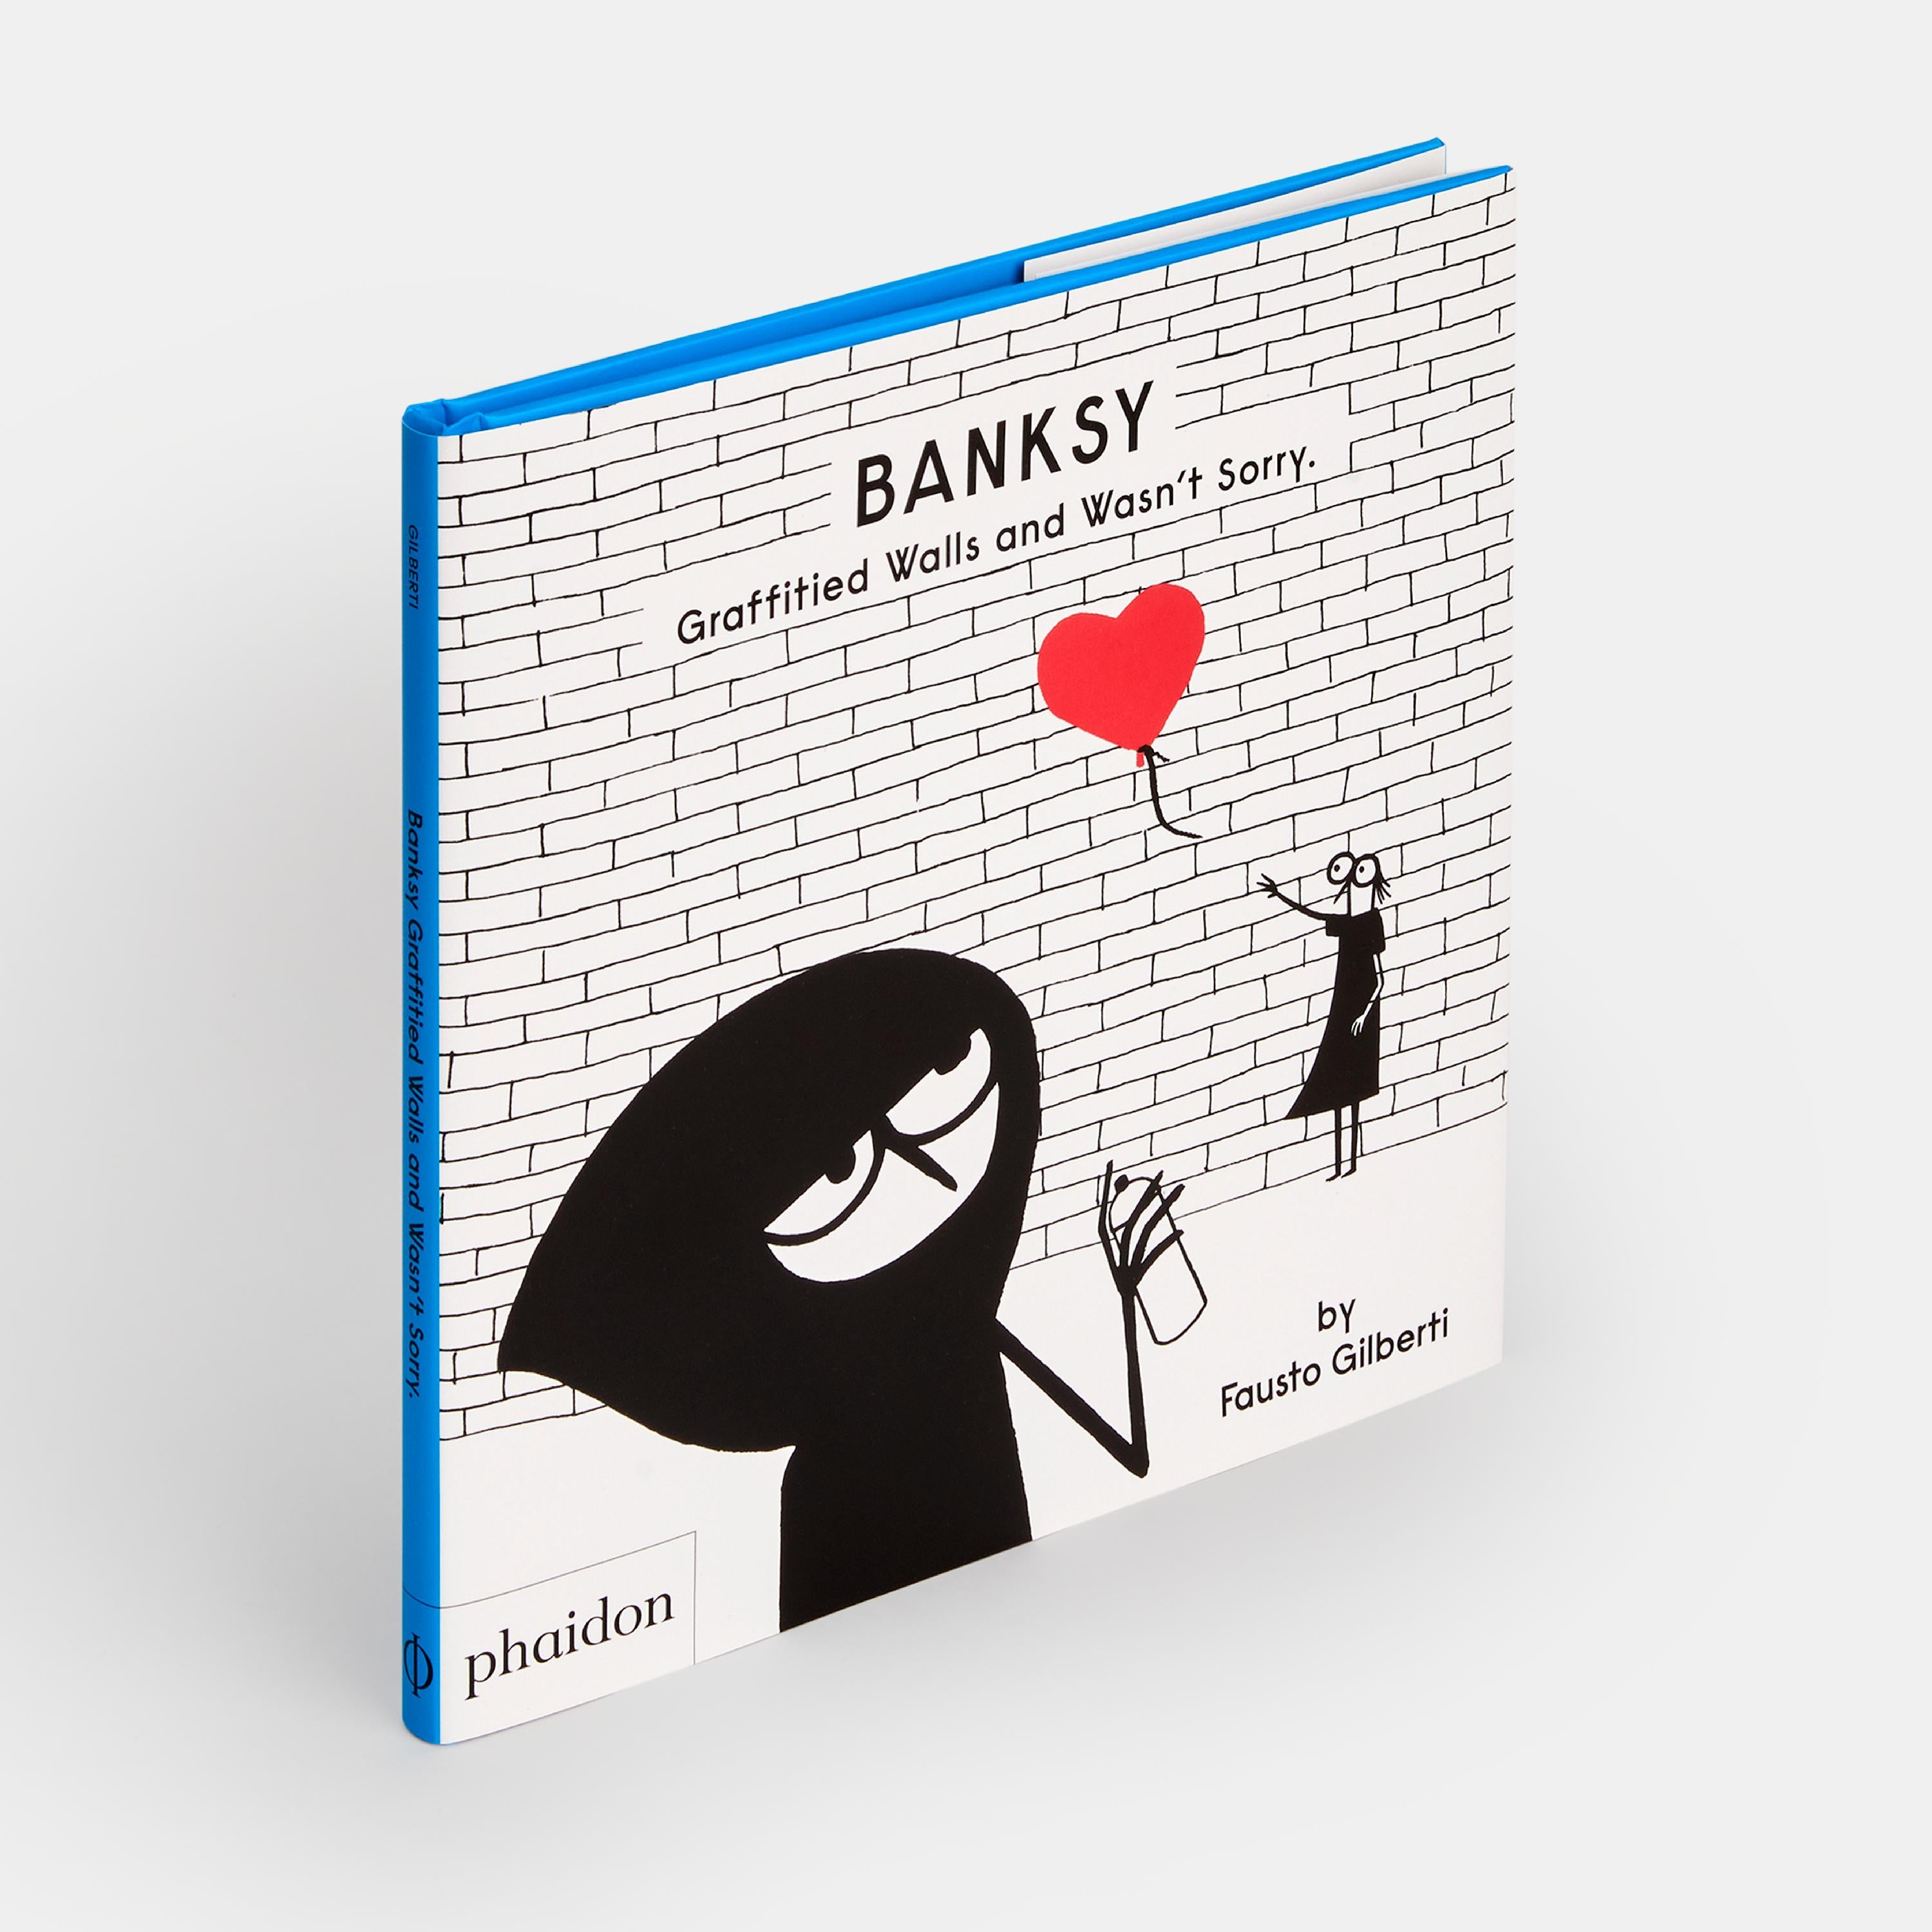 A clever, quirky biography of a leading contemporary artist, for children

Banksy is a world-famous graffiti artist who secretly spray paints pictures on streets and walls while no one is watching! His works are often about politics, war, and other